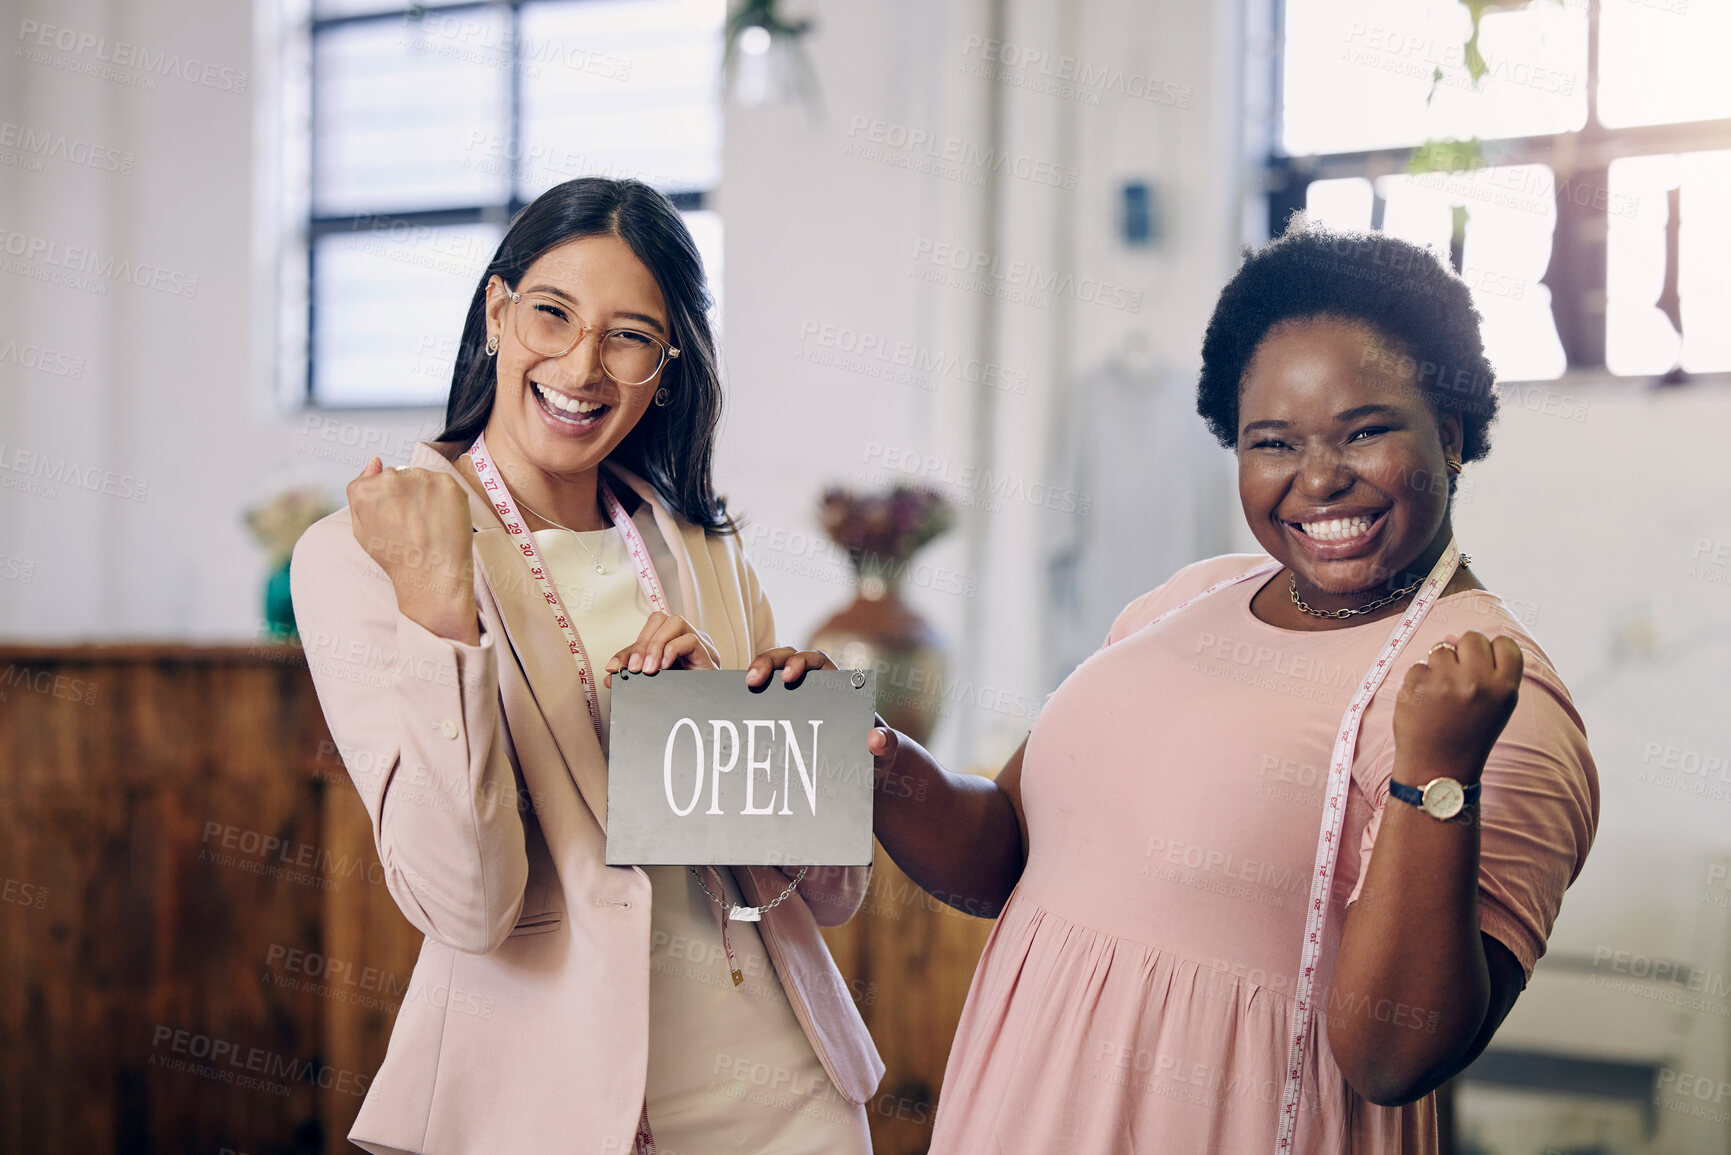 Buy stock photo Shot of two women working together in a boutique